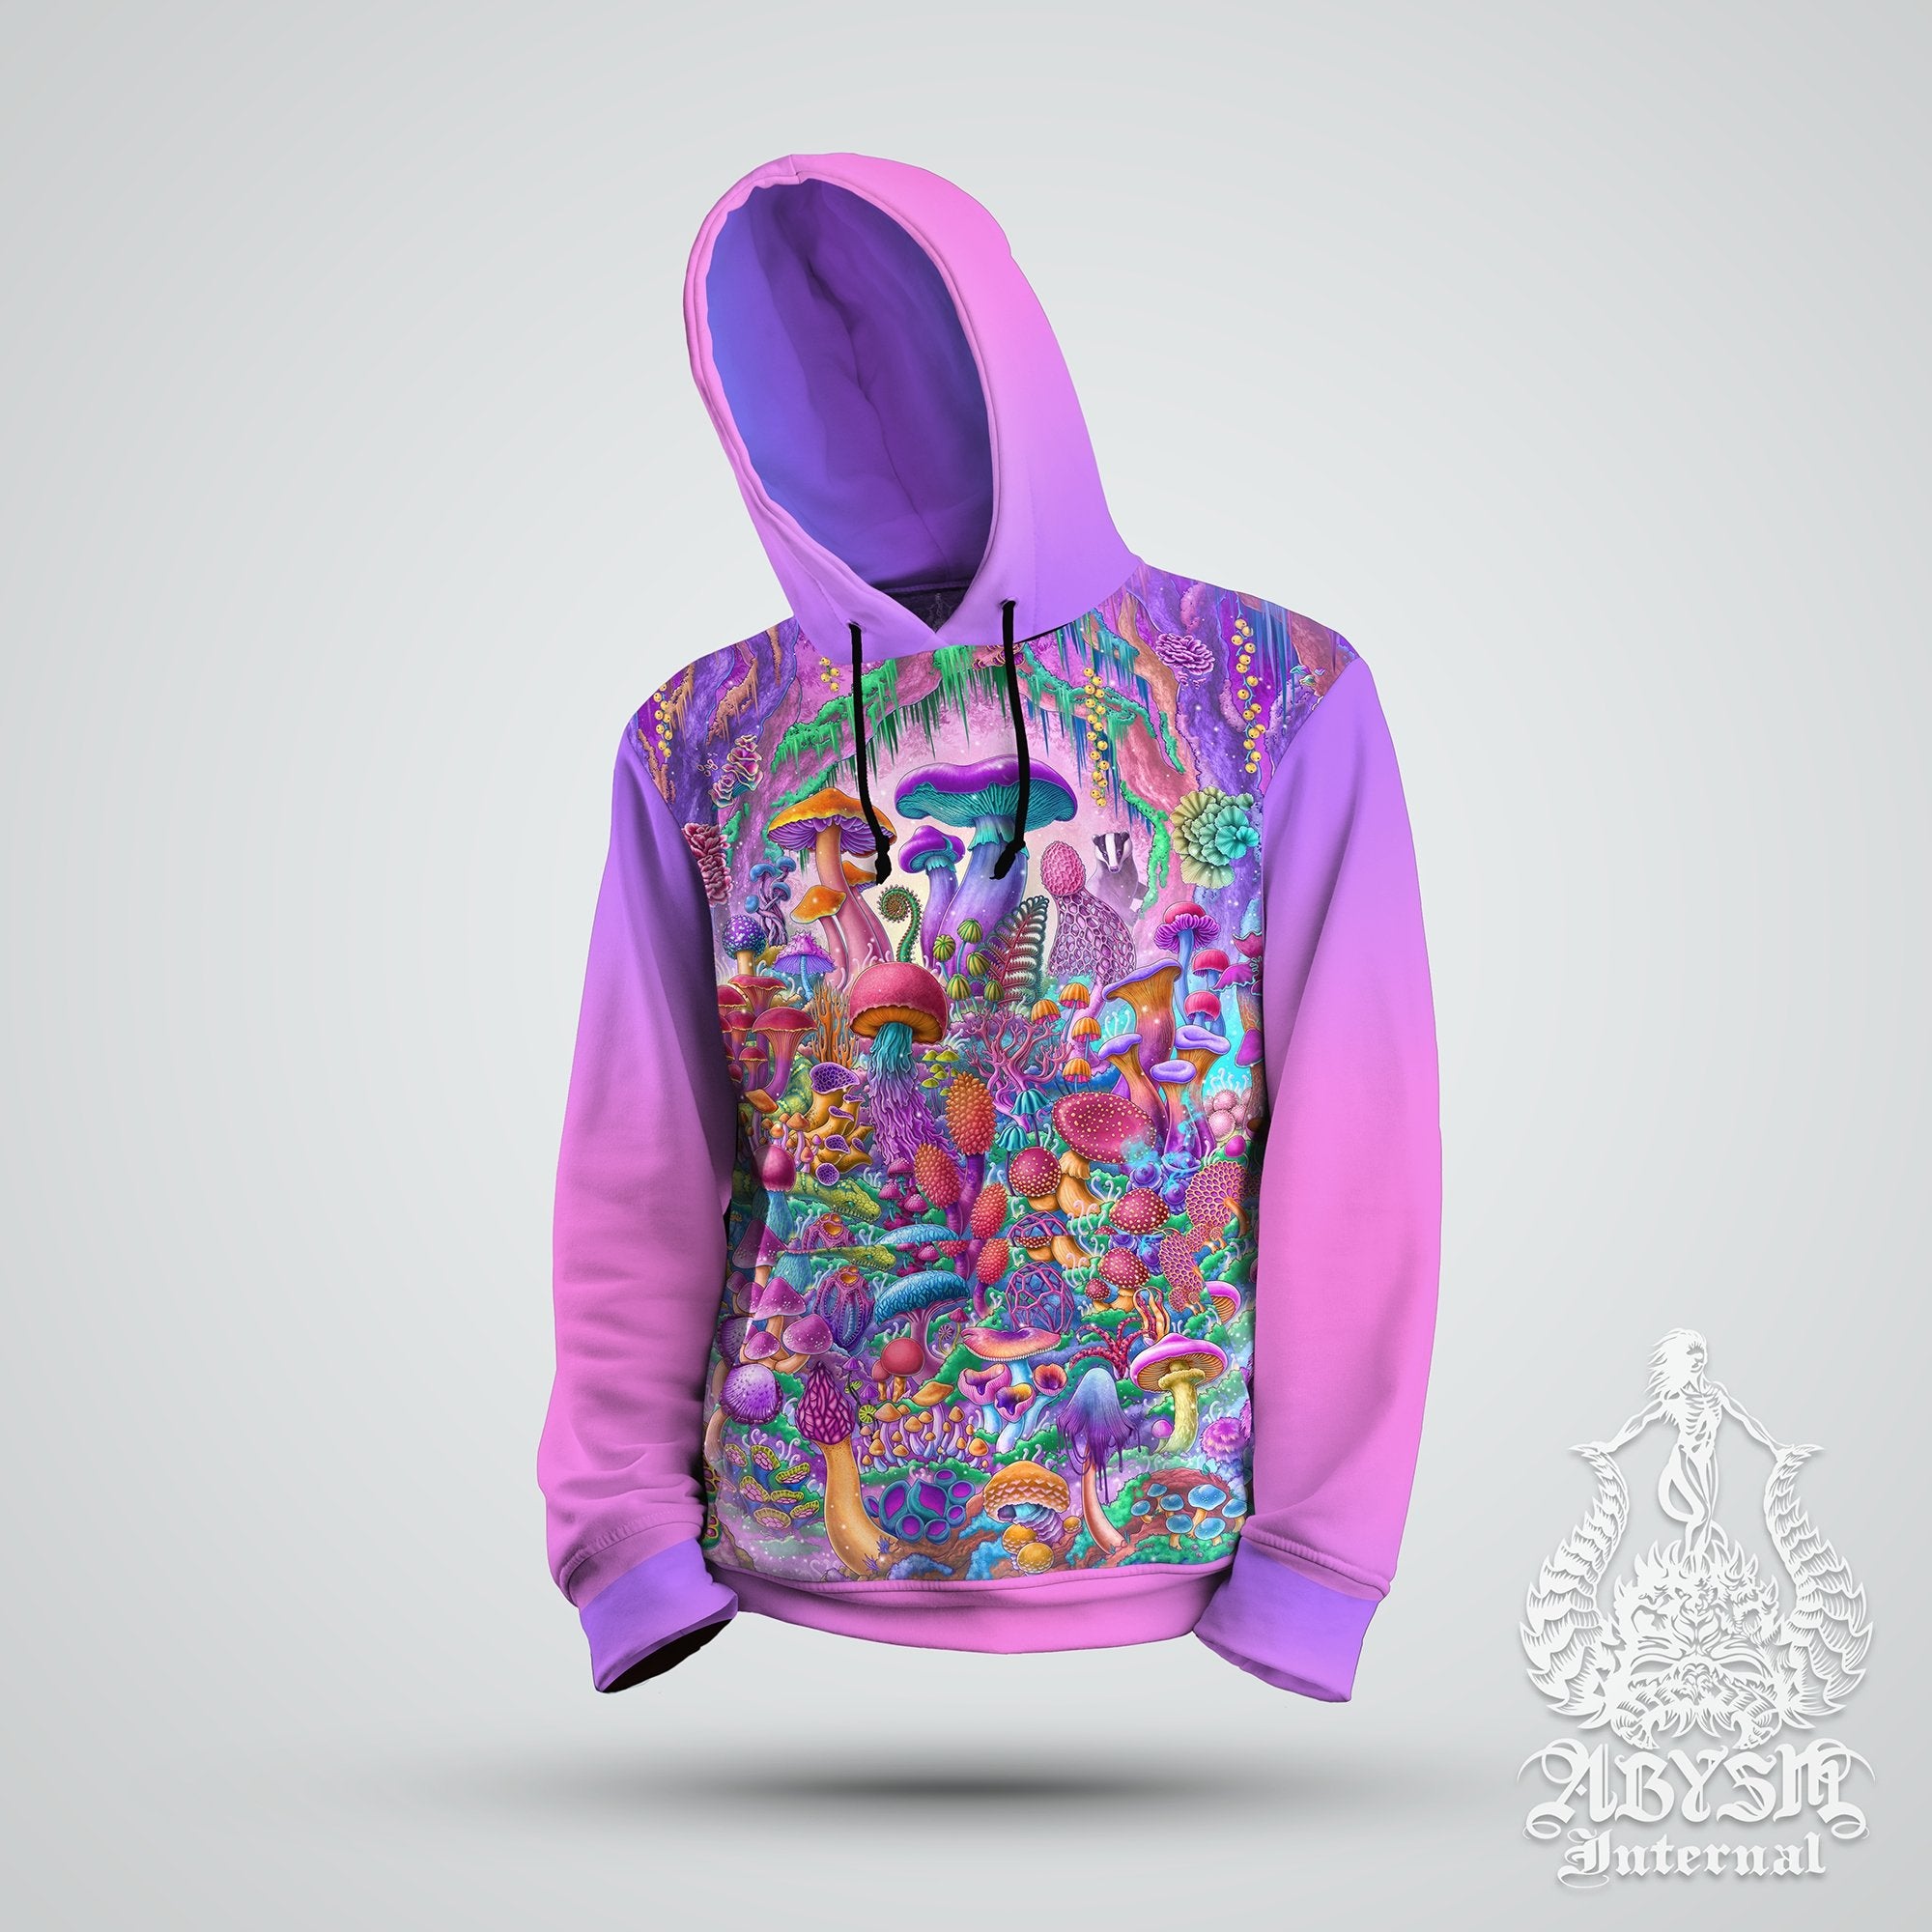 Mushrooms Hoodie, Trippy Aesthetic Pullover, Festival Outfit, Psychedelic Magic Shrooms, Pastel Girl Streetwear, Indie Alternative Clothing, Unisex - Abysm Internal